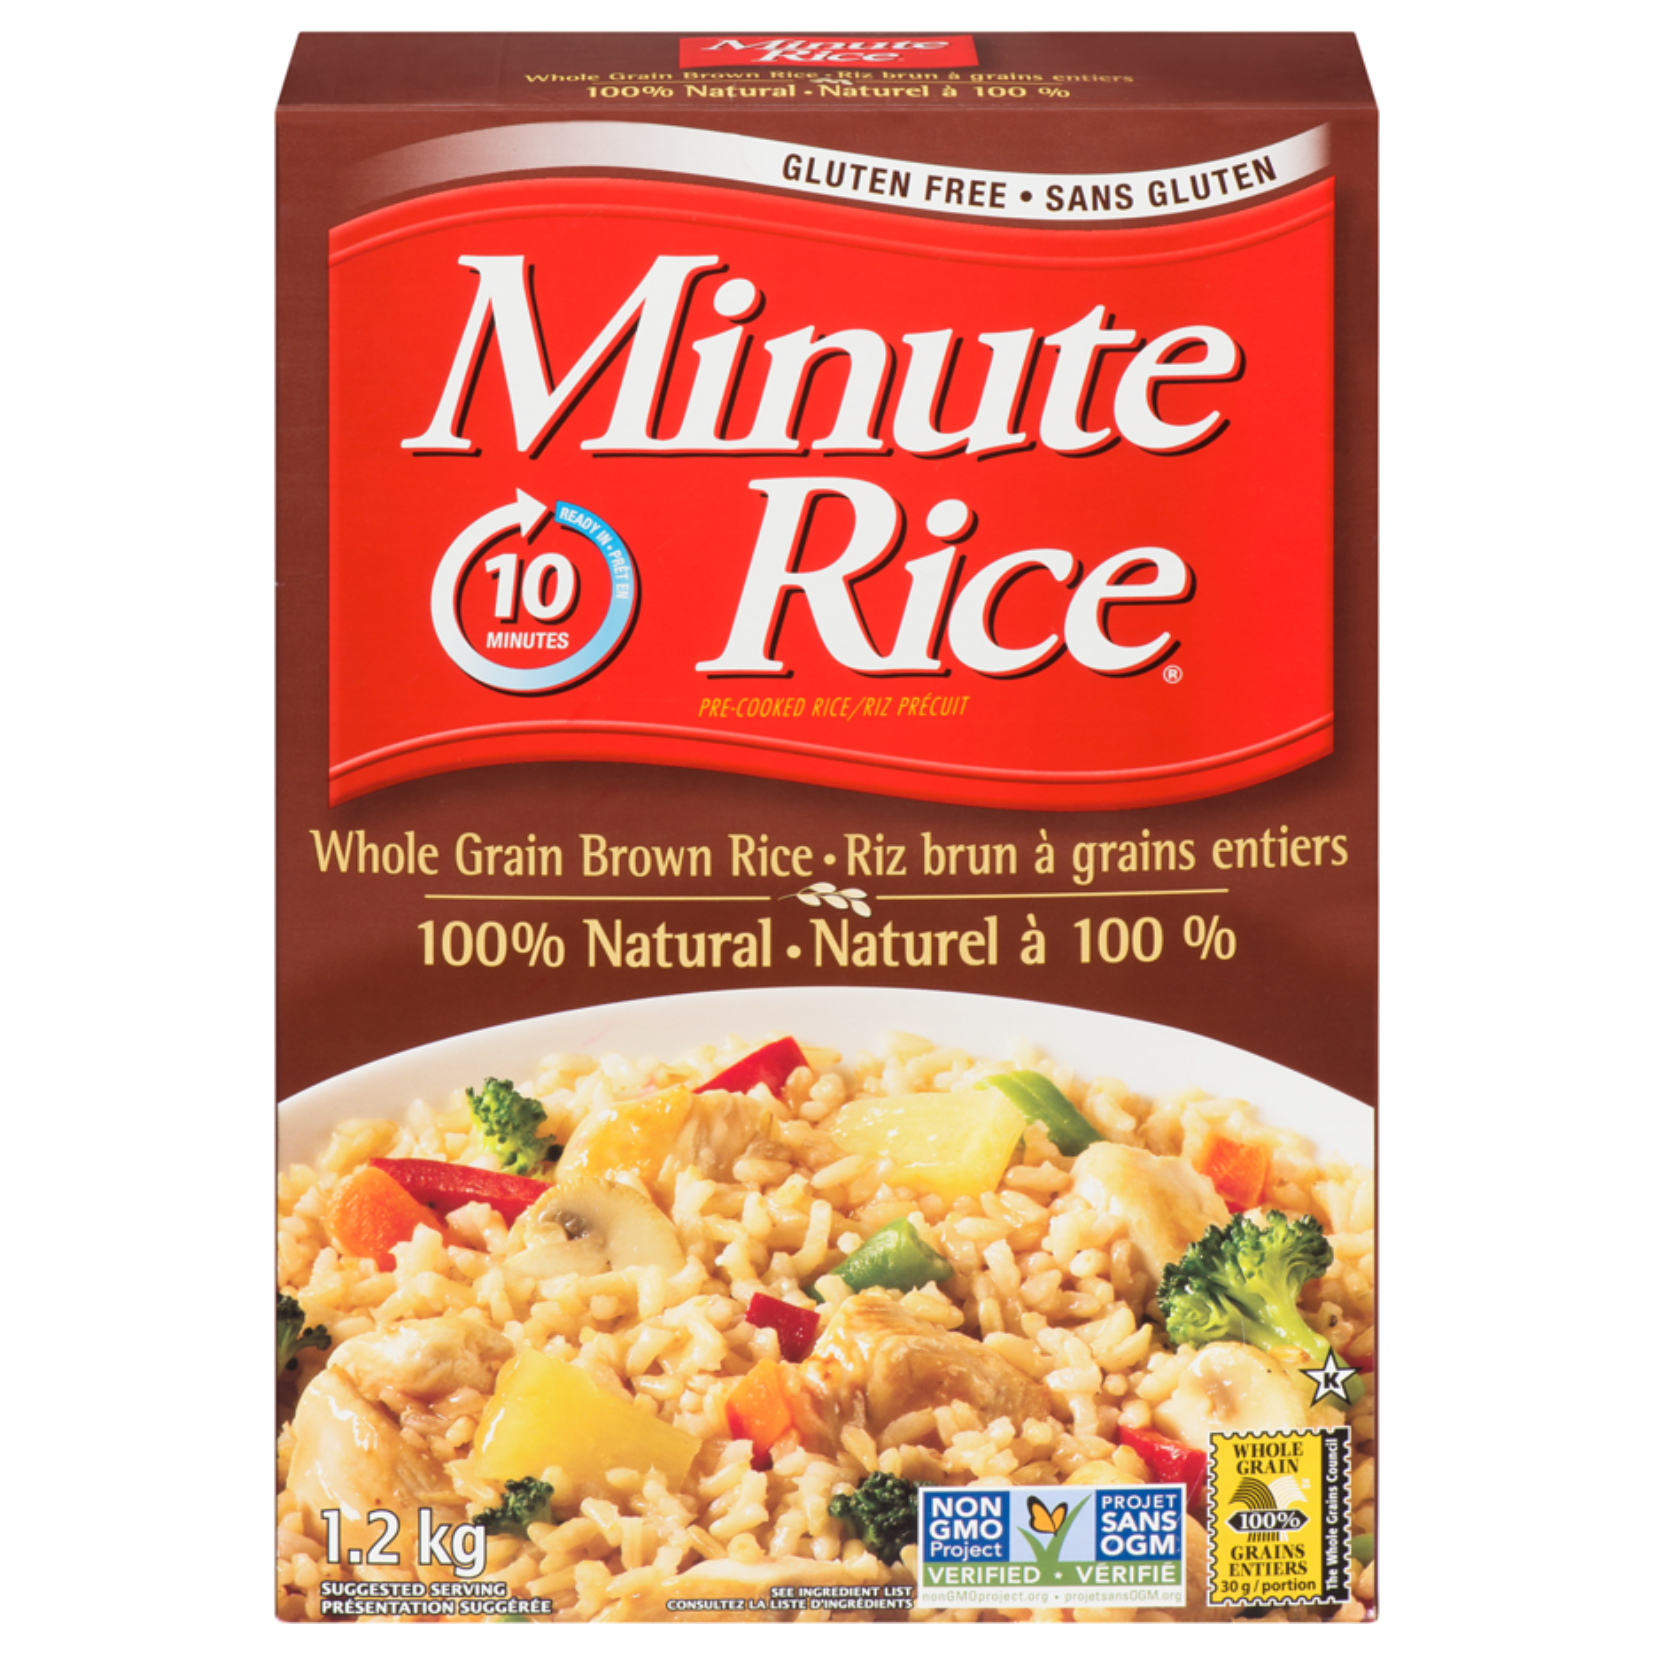 Minute Rice Whole Grain Brown Rice 1.2kg